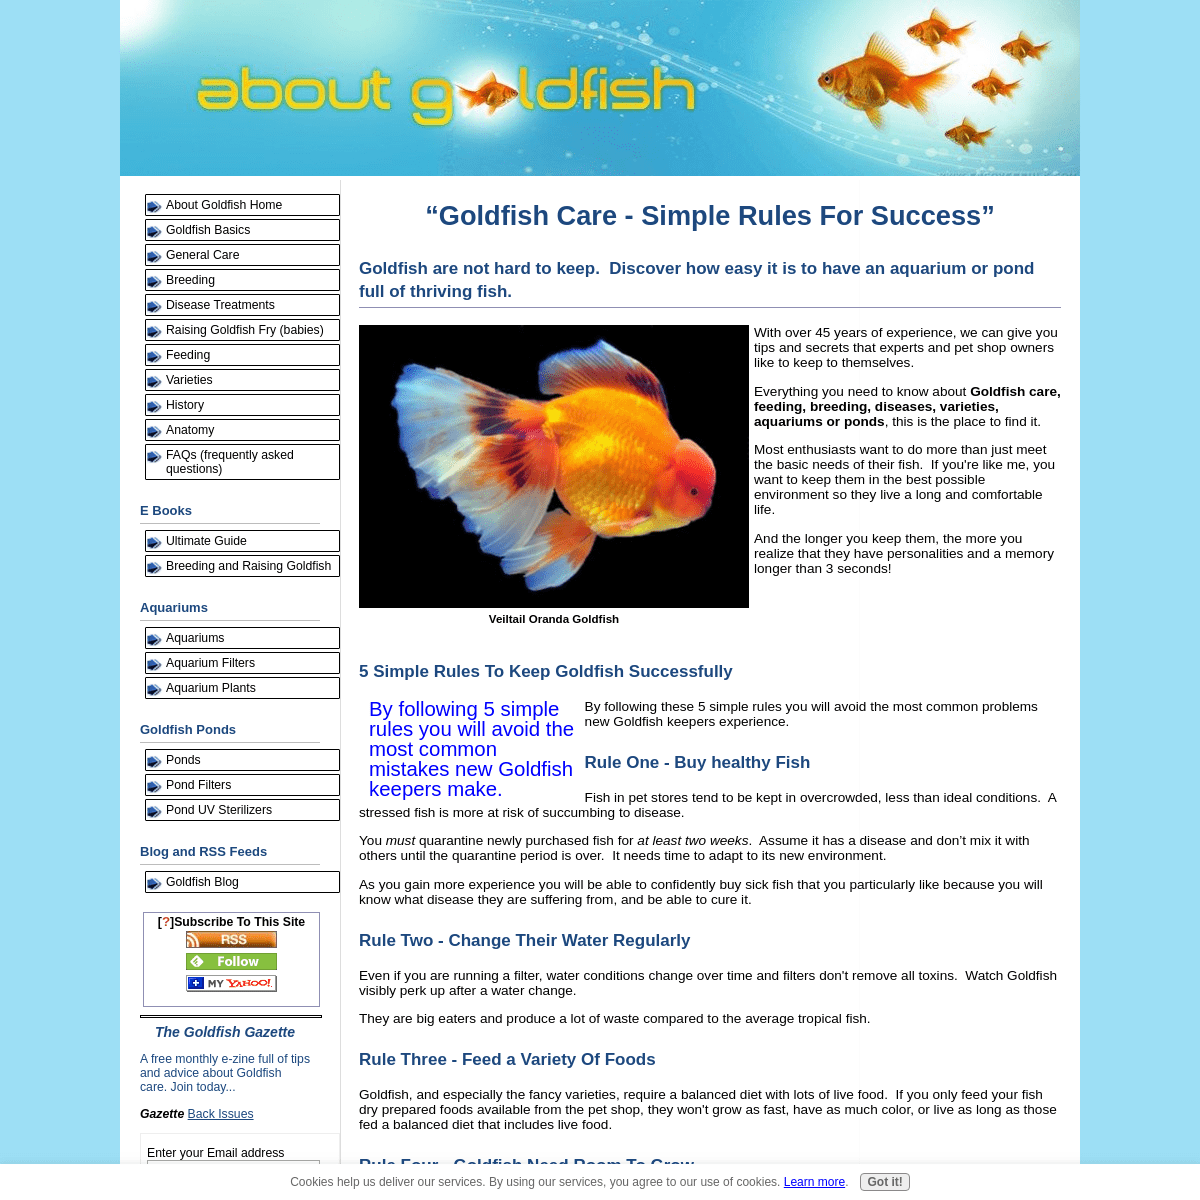 A complete backup of about-goldfish.com